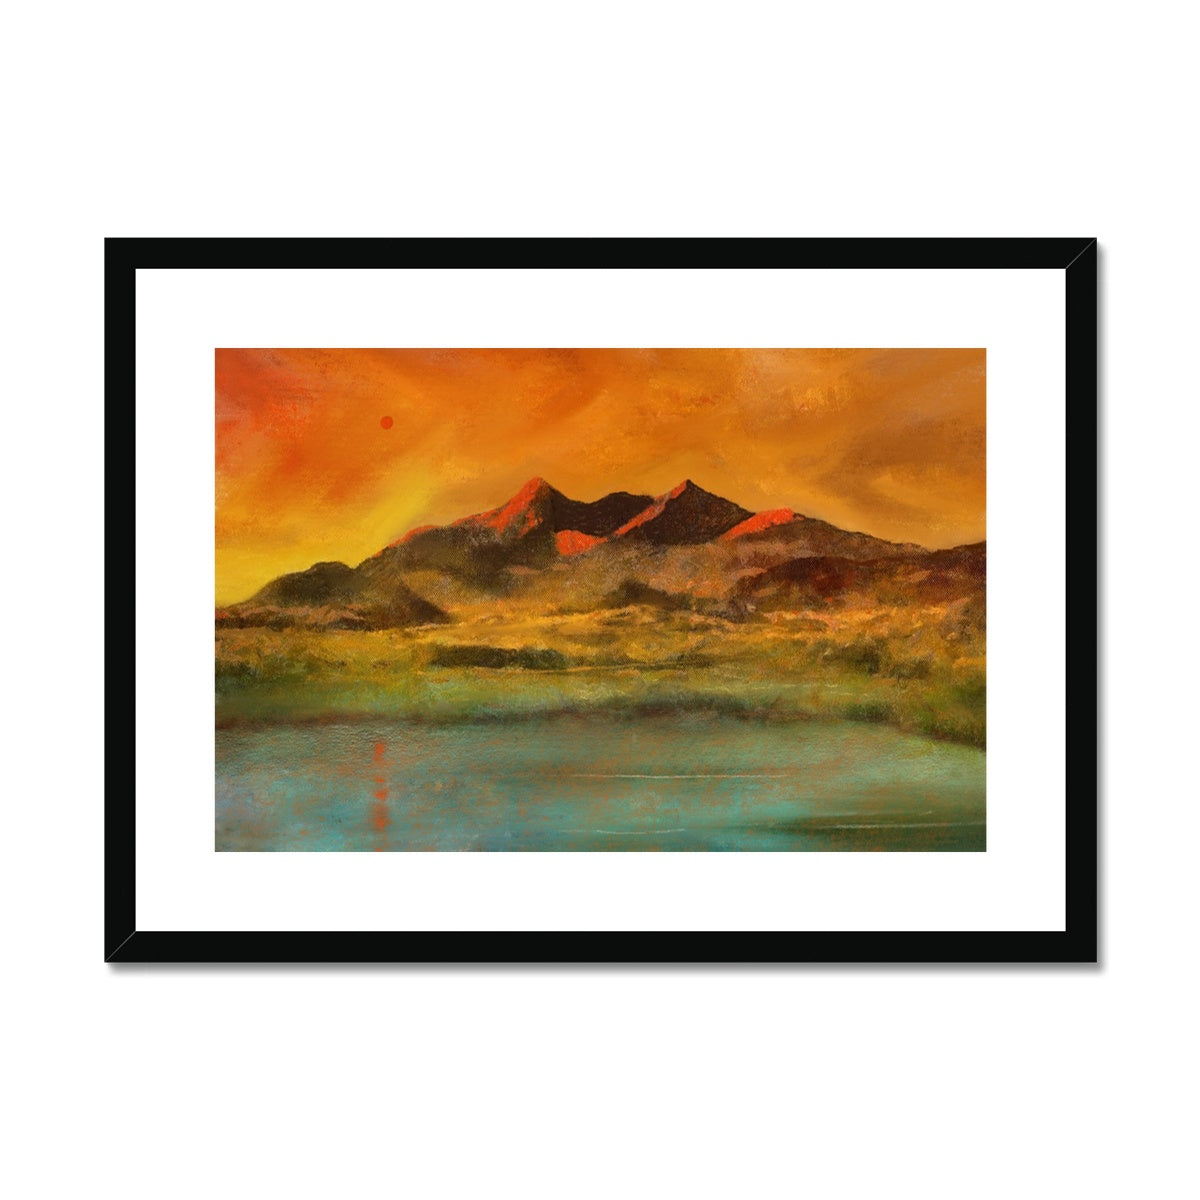 Skye Red Moon Cuillin Painting | Framed & Mounted Prints From Scotland-Framed & Mounted Prints-Skye Art Gallery-A2 Landscape-Black Frame-Paintings, Prints, Homeware, Art Gifts From Scotland By Scottish Artist Kevin Hunter